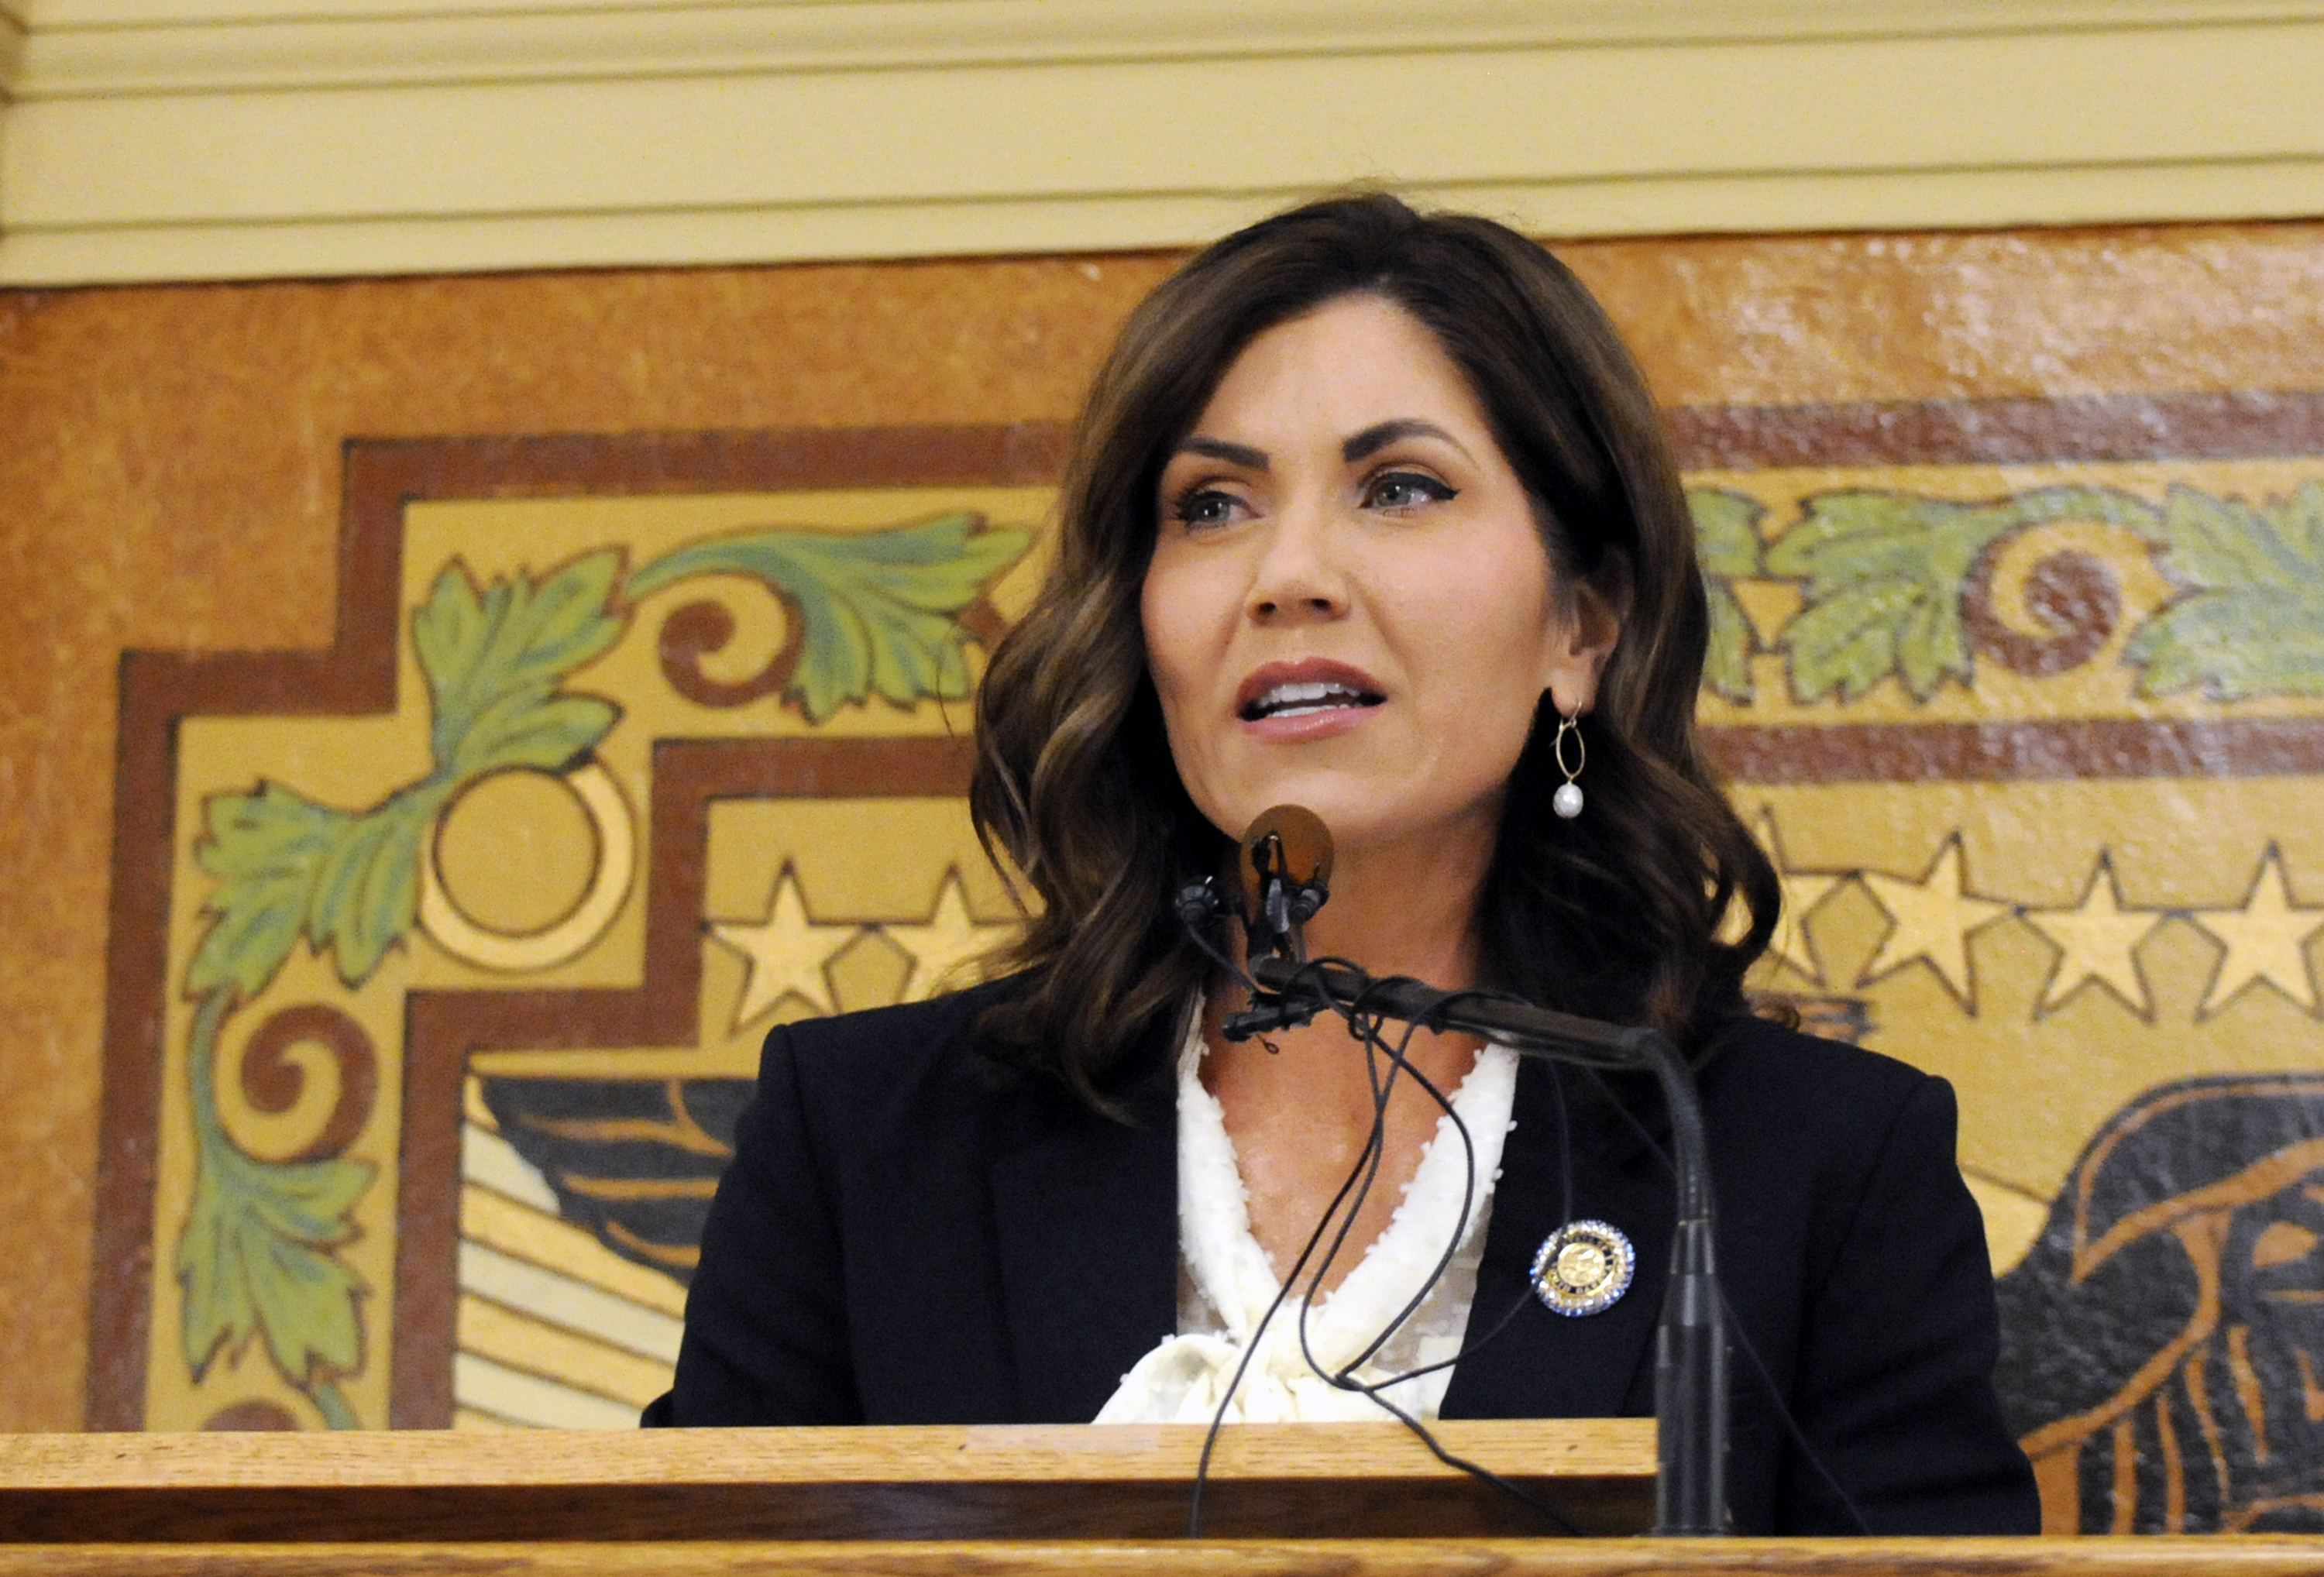 South Dakota Gov. Kristi Noem gives her first State of the State address in Pierre, S.D., on Jan. 8, 2019. (James Nord—AP)